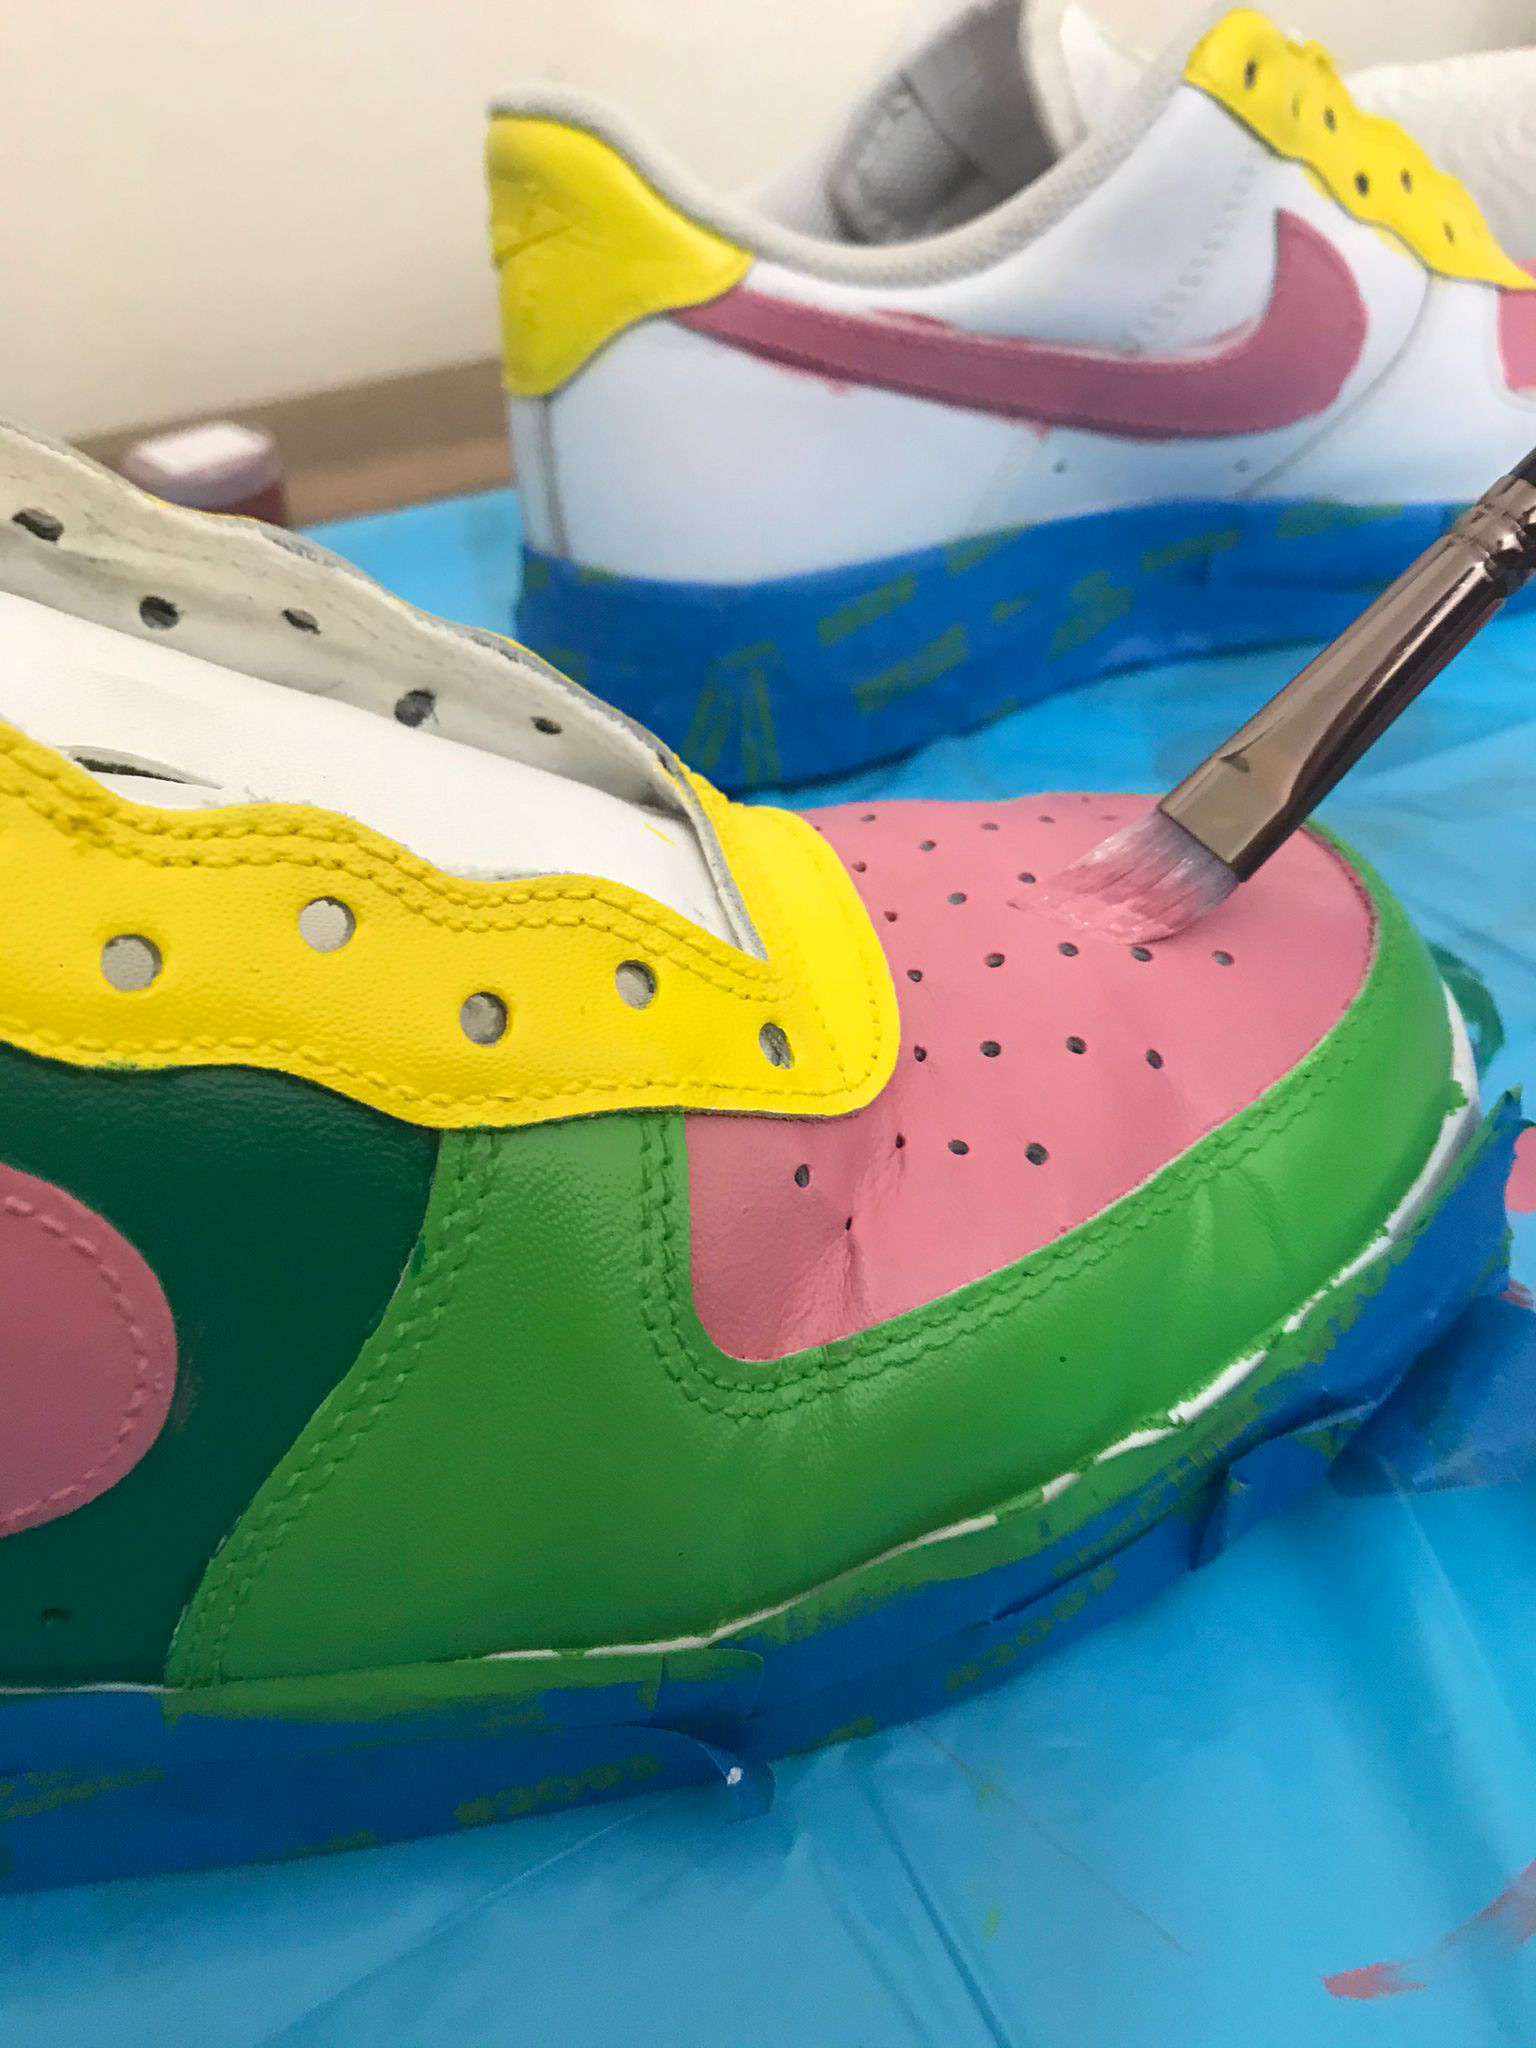 Nike Air Force 1 - Color Drip - Hand Drawn Paint Marker - Custom Sneakers - Colorful Customized Shoes - Nike Rainbow Custom